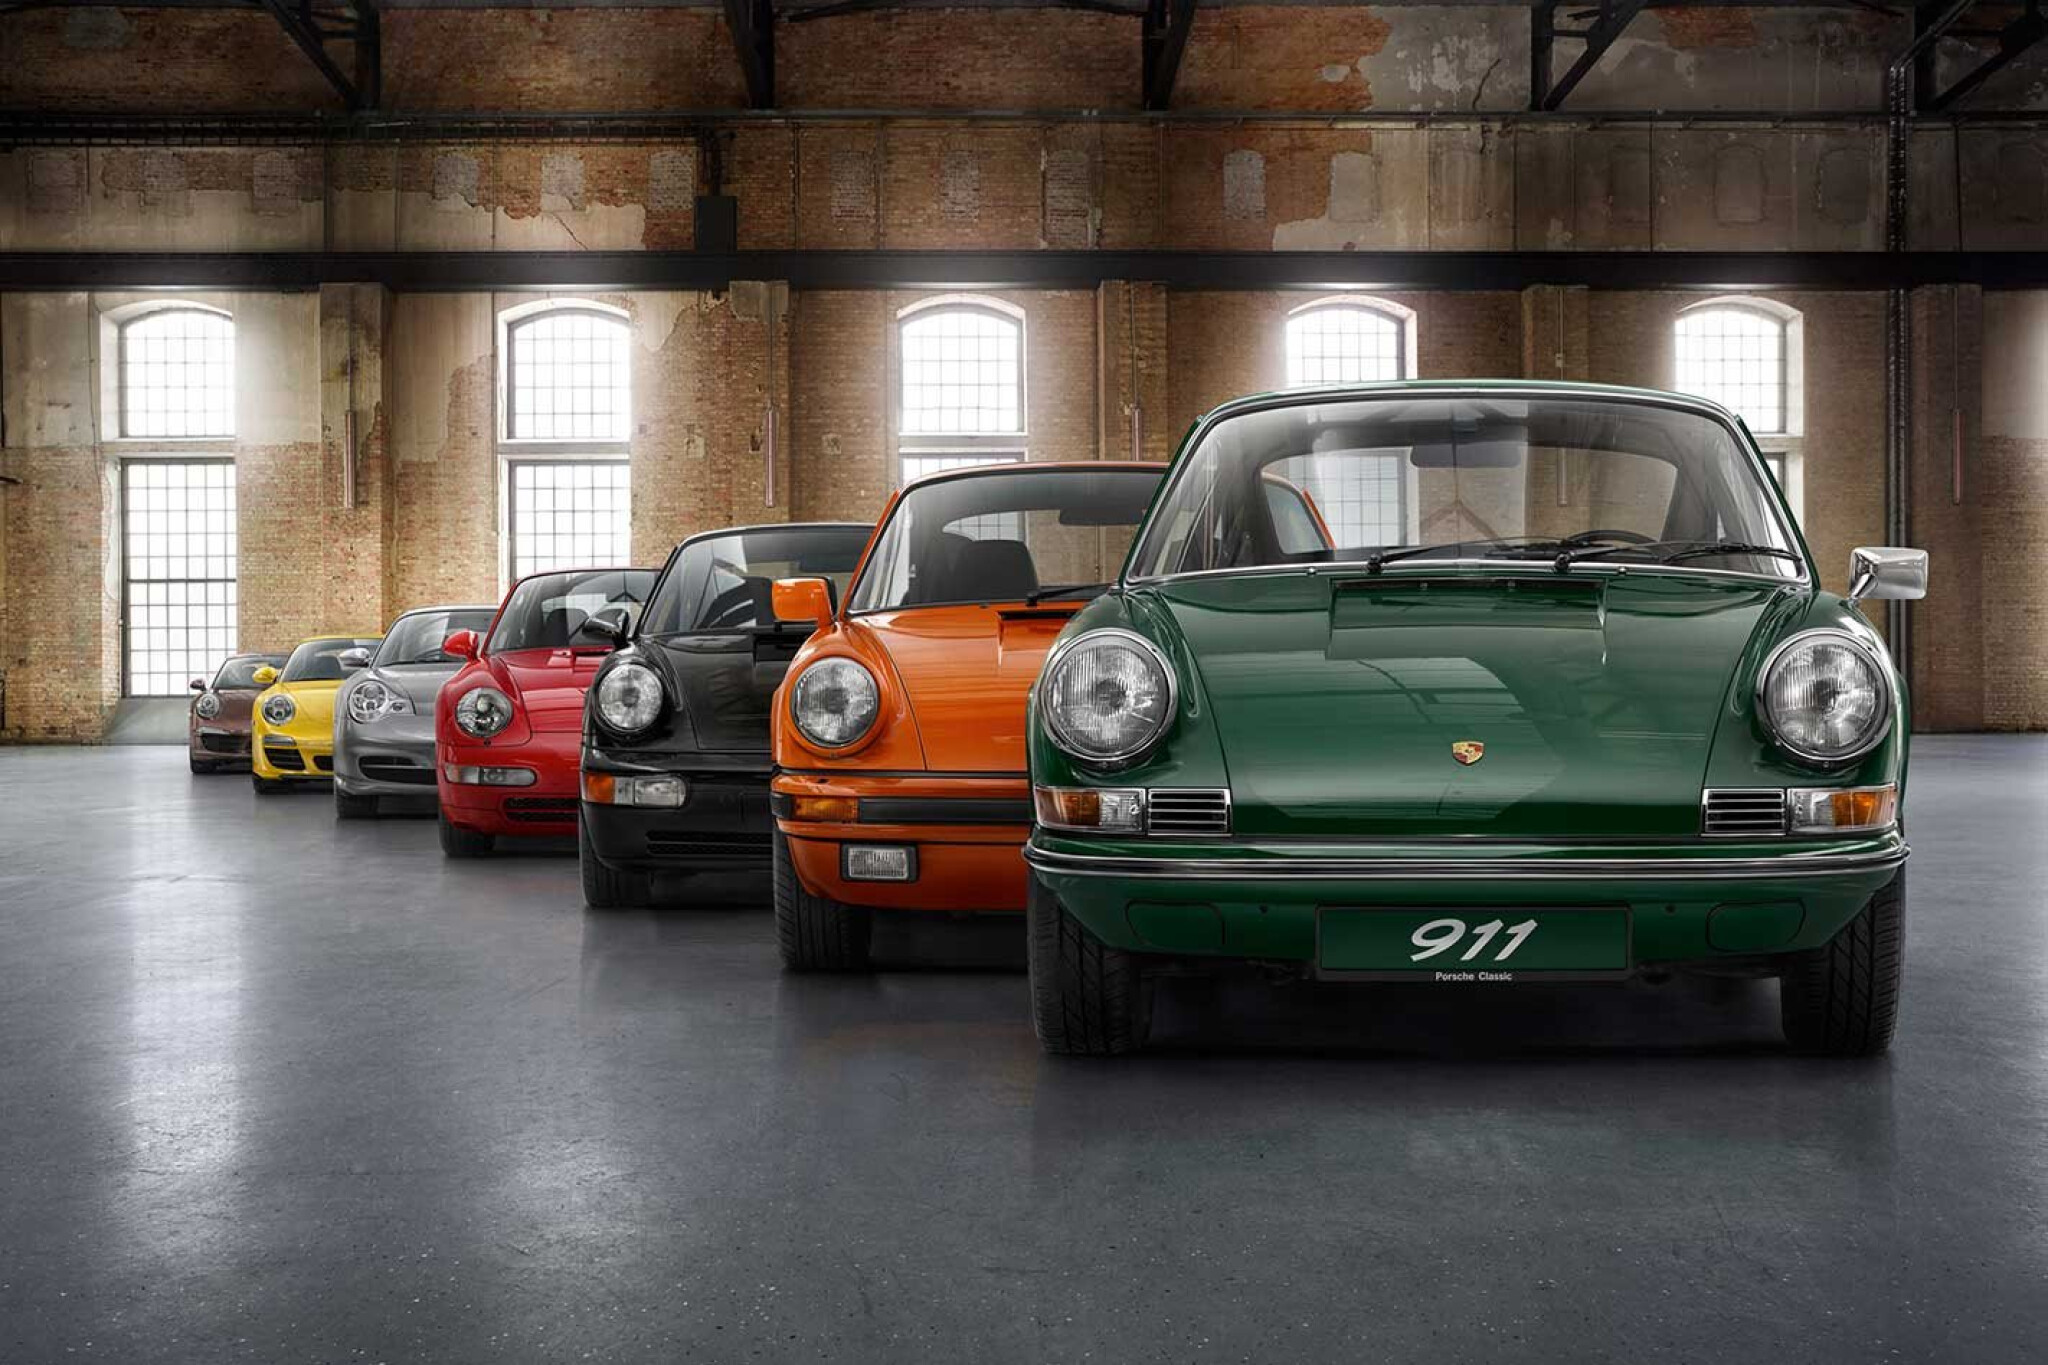 Seven generations of the Porsche 911 in pictures.